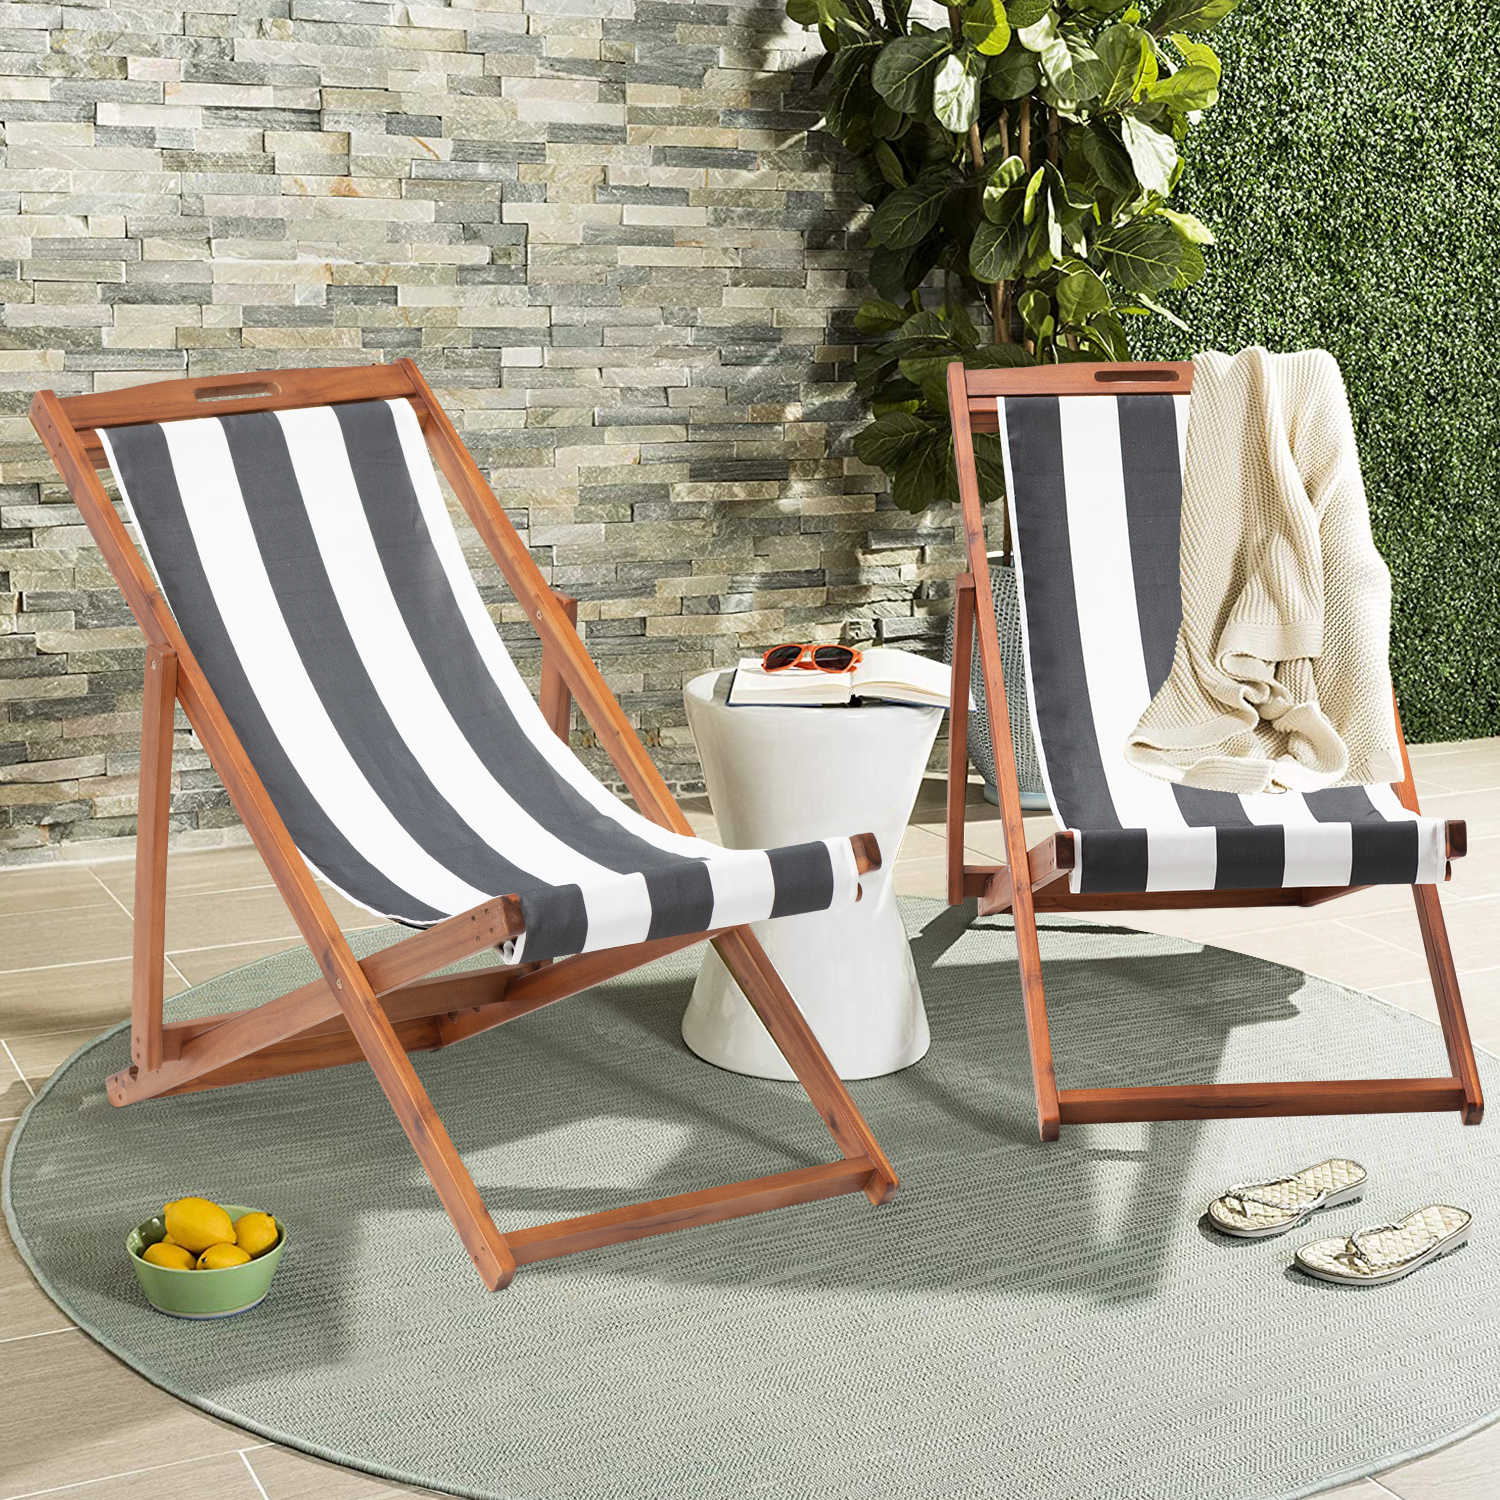 Beach Sling Chair Set of 2,  Adjustable Reclining Beach Chair  Outdoor Foldable Lounge Chairs for Garden, Backyard, Poolside, Balcony - image 3 of 7